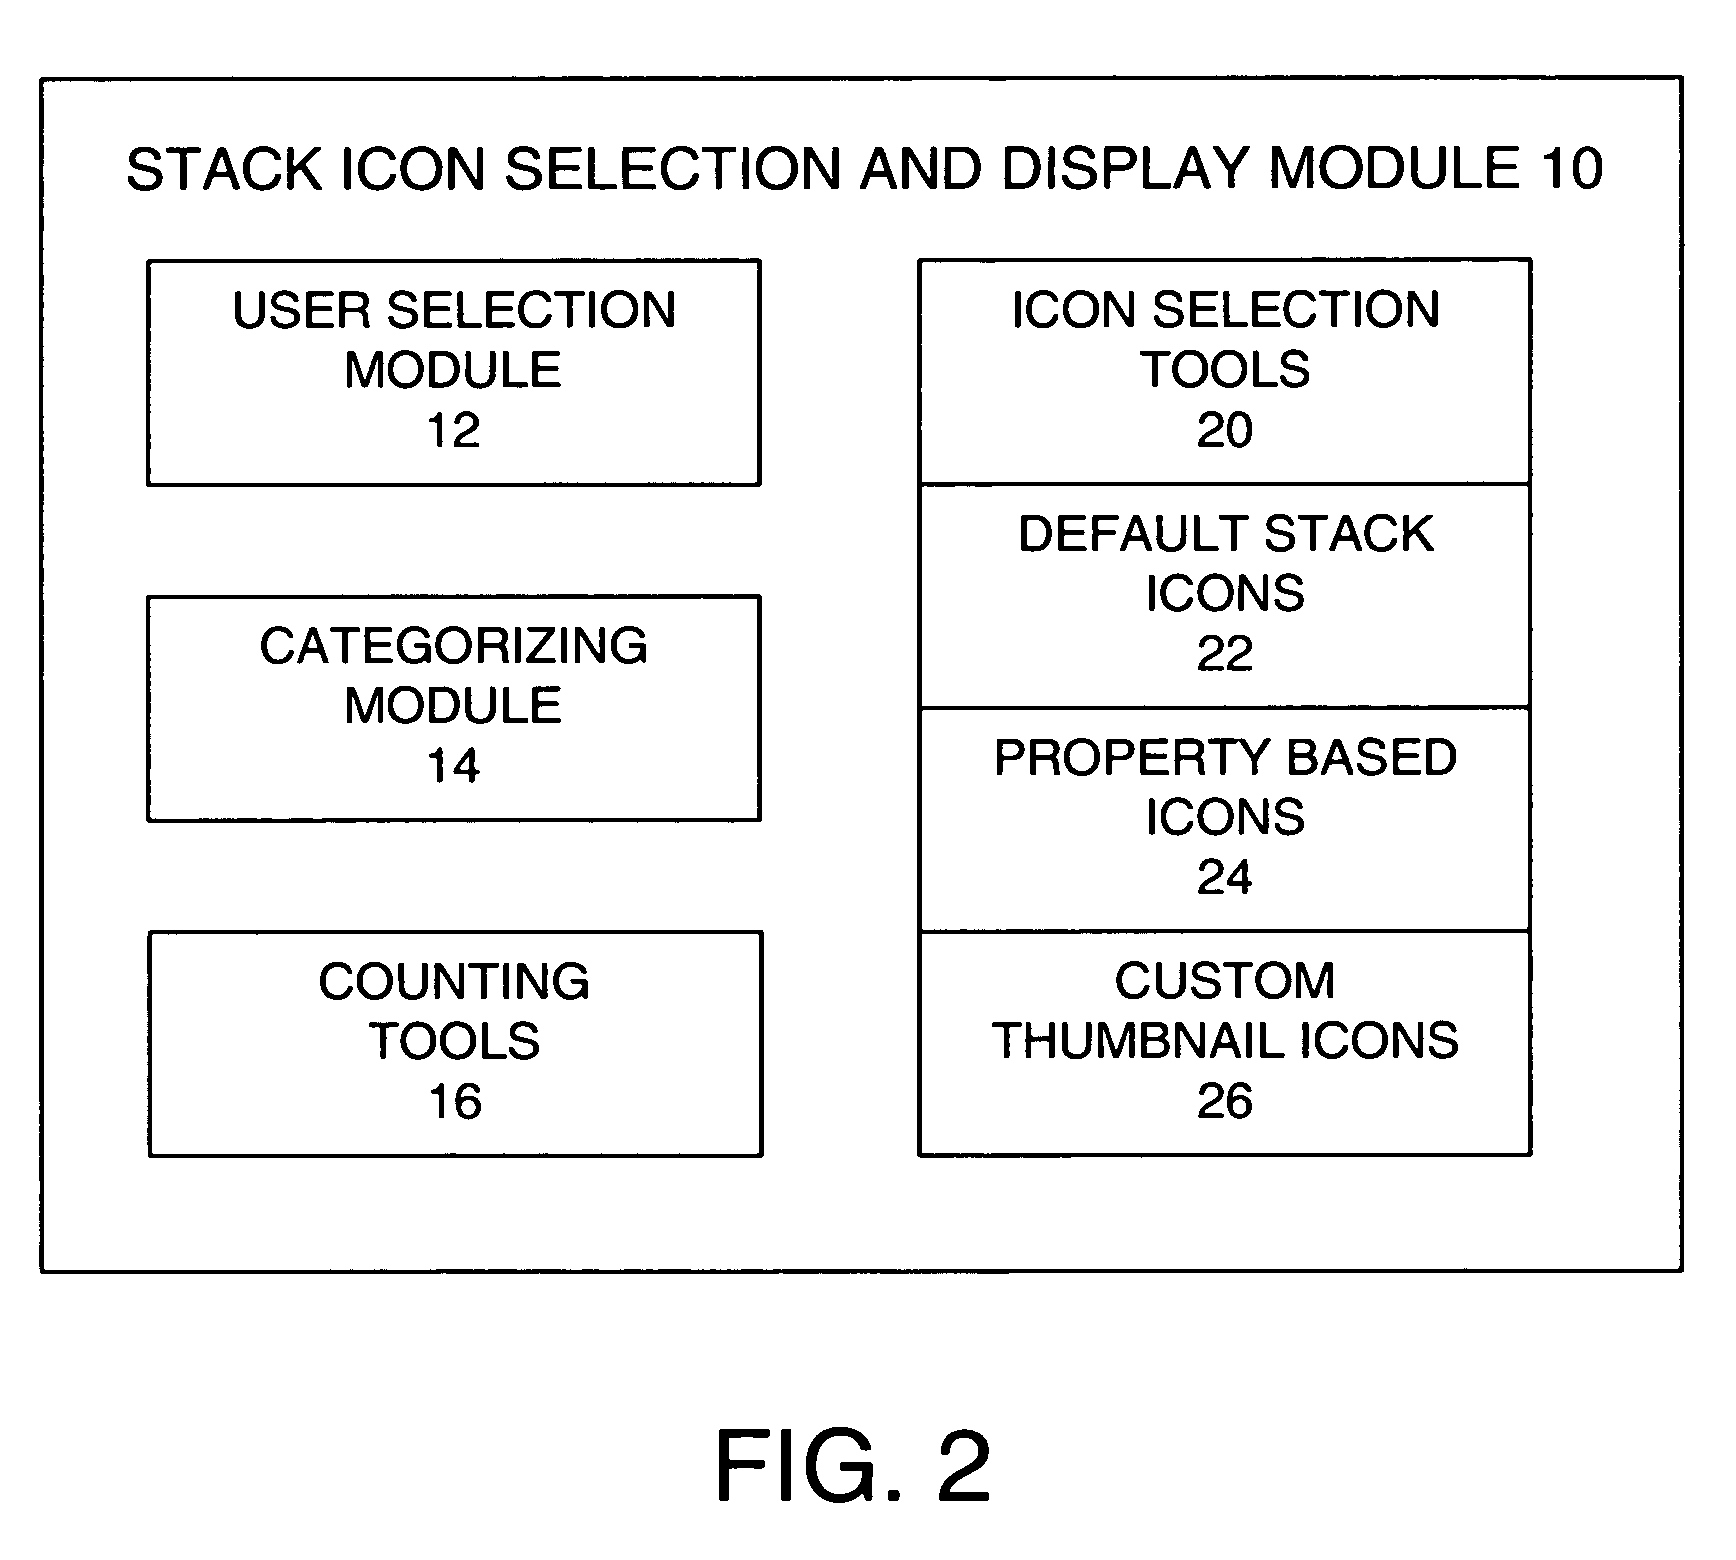 Stack icons representing multiple objects